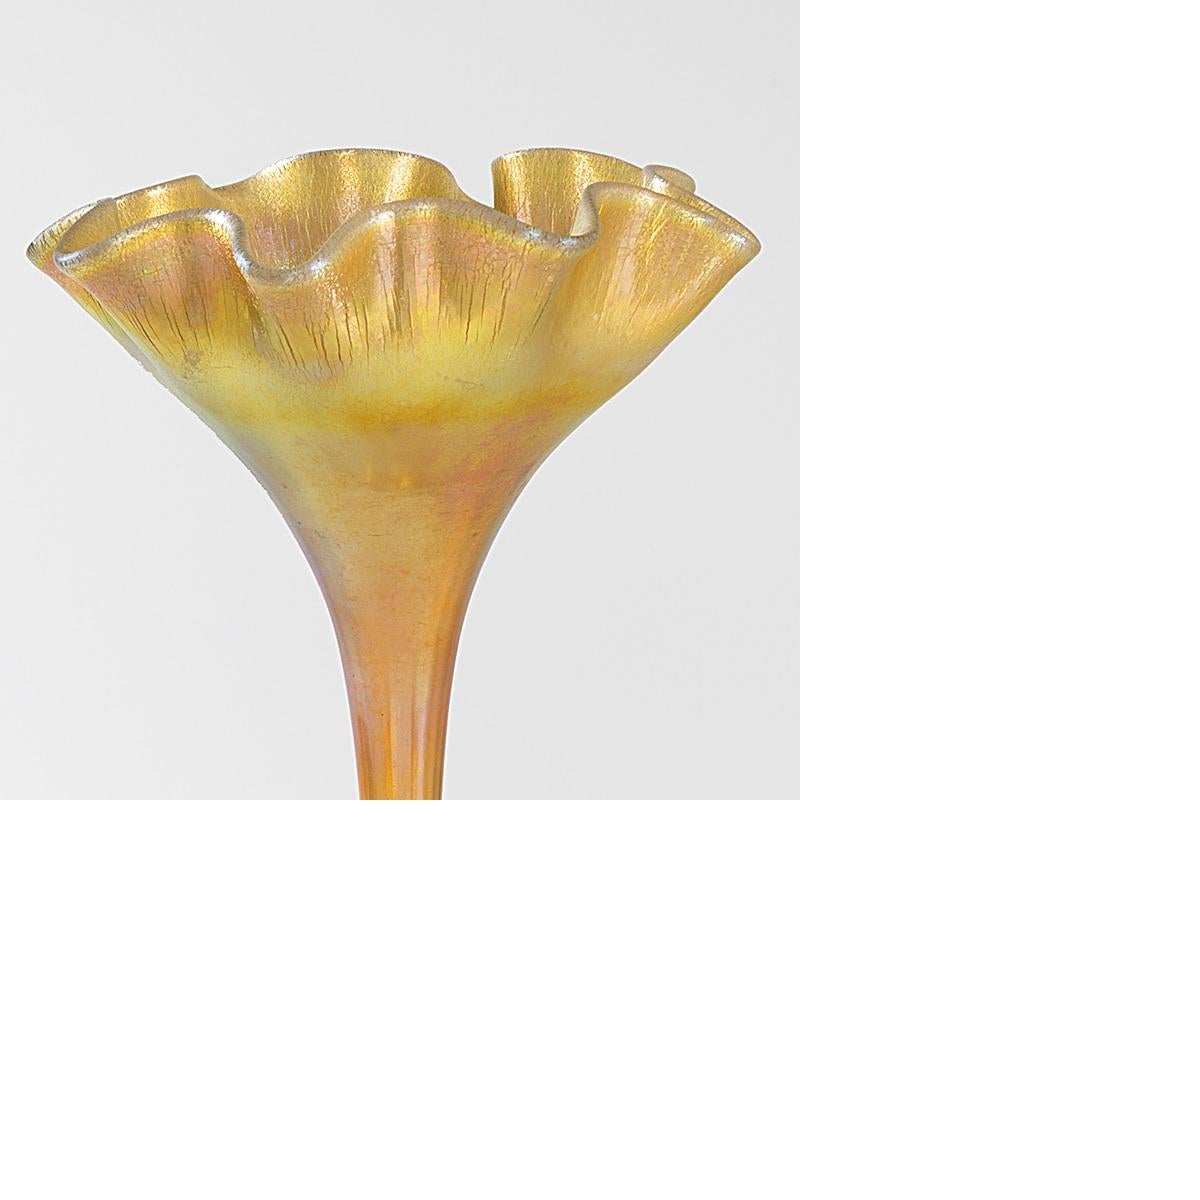 A Tiffany Studios New York iridescent gold Favrile ruffled floriform glass vase.   This vase is unusual both for its size and for its bulbous foot, seen more often in Tiffany's Jack-in-the-Pulpit vases than his floriform vases.  Circa 1900.